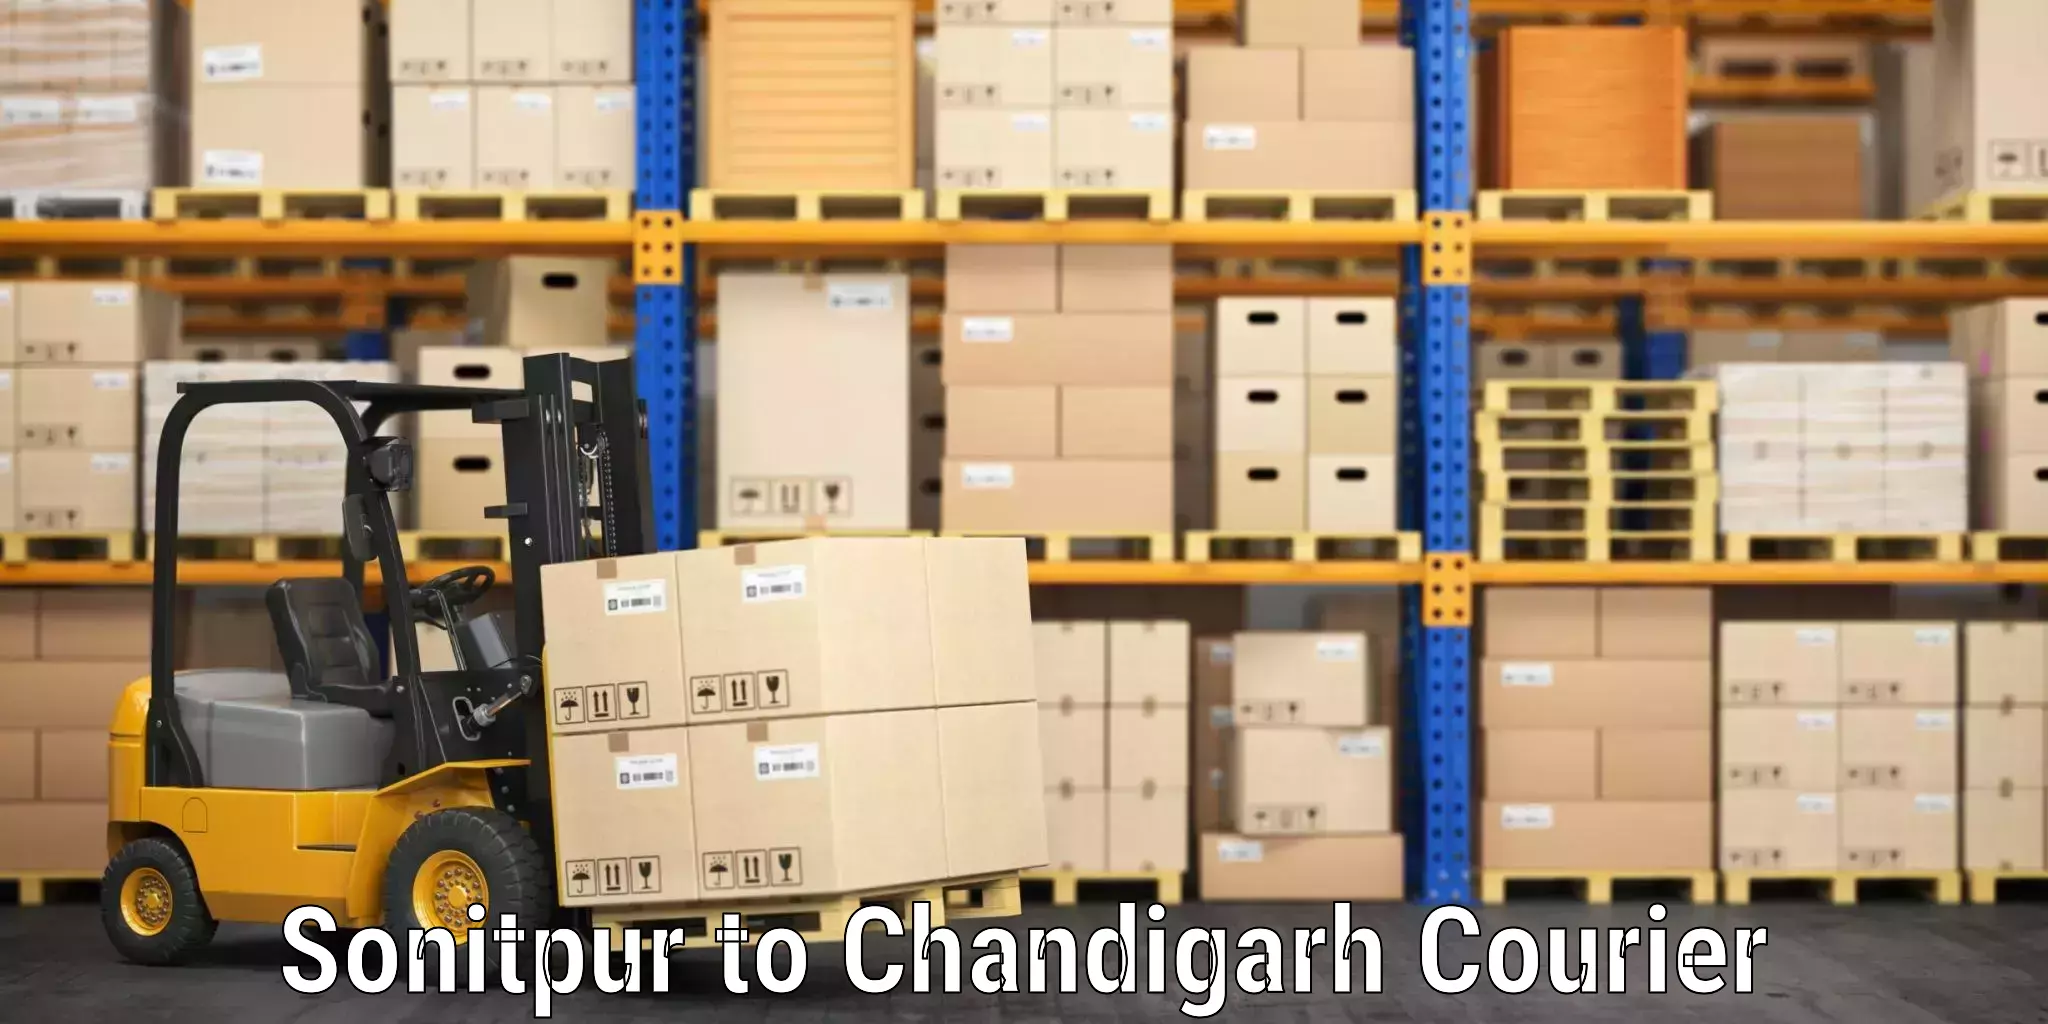 Online luggage shipping booking Sonitpur to Chandigarh